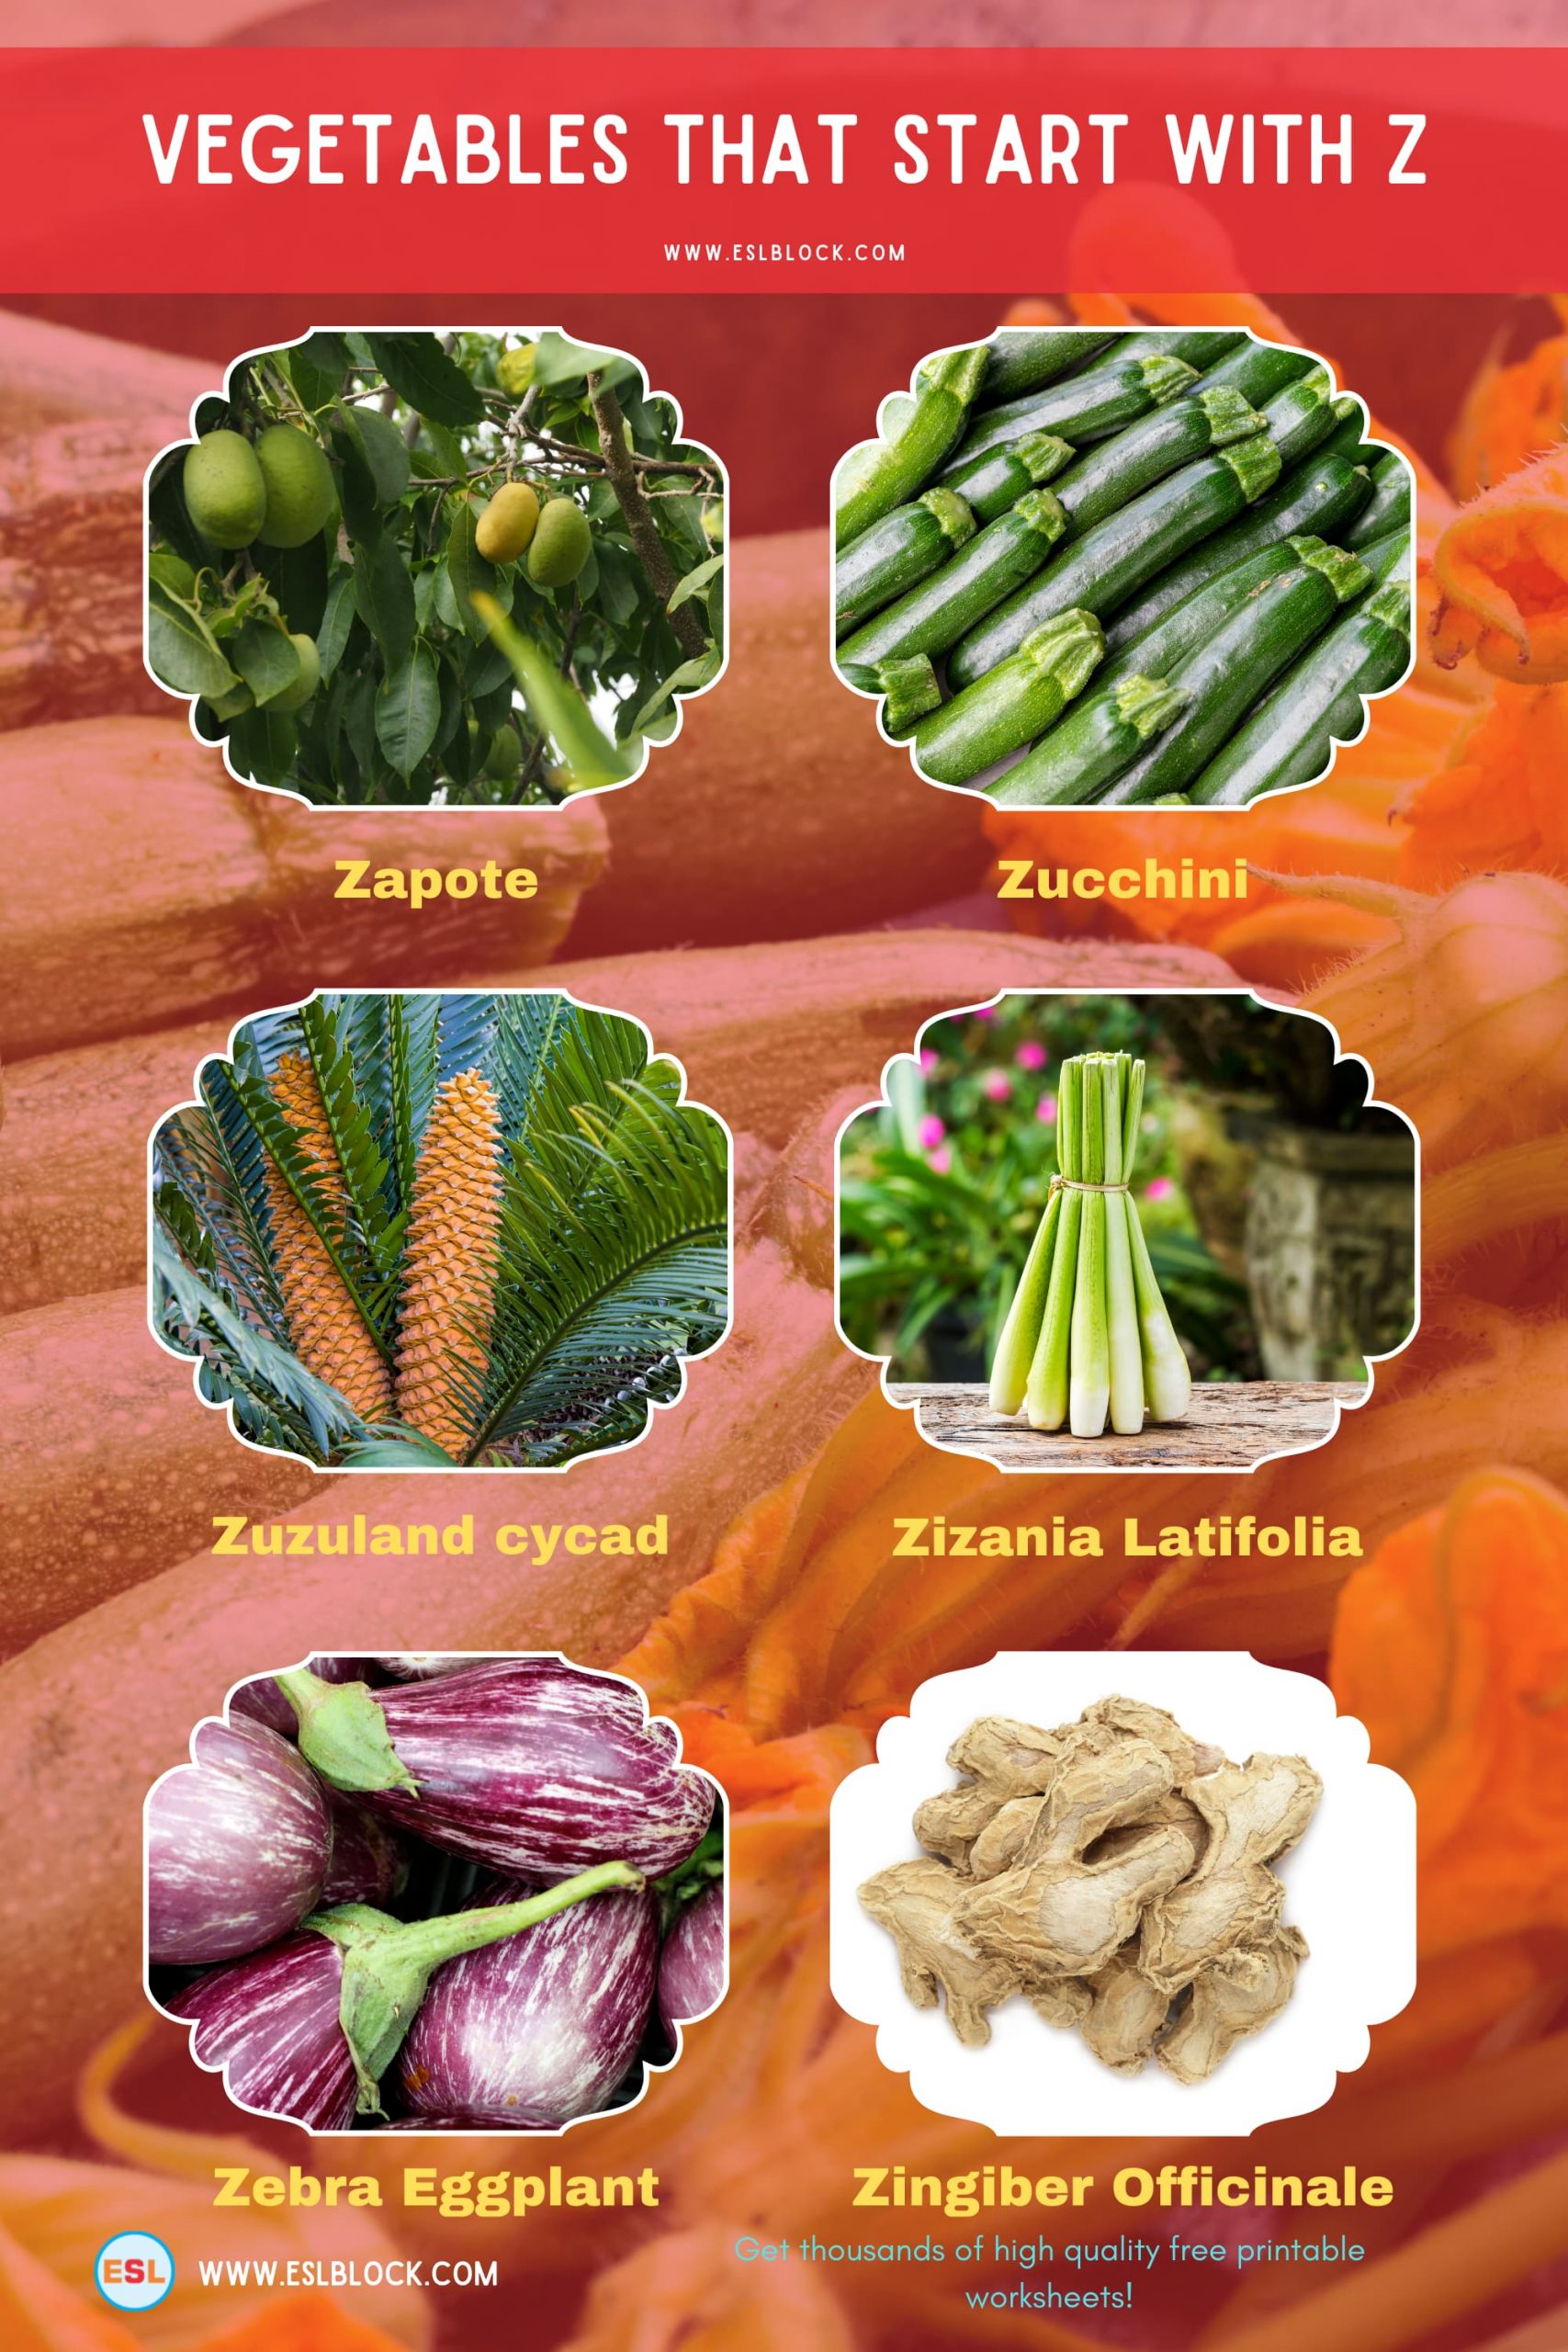 5 Letter Vegetables Starting With Z, English, English Nouns, English Vocabulary, English Words, List of Vegetables That Start With Z, Nouns, Vegetables List, Vegetables Names, Vegetables That Begins With Z, Vegetables That Start With Z, Vocabulary, Z Vegetables, Z Vegetables in English, Z Vegetables Names